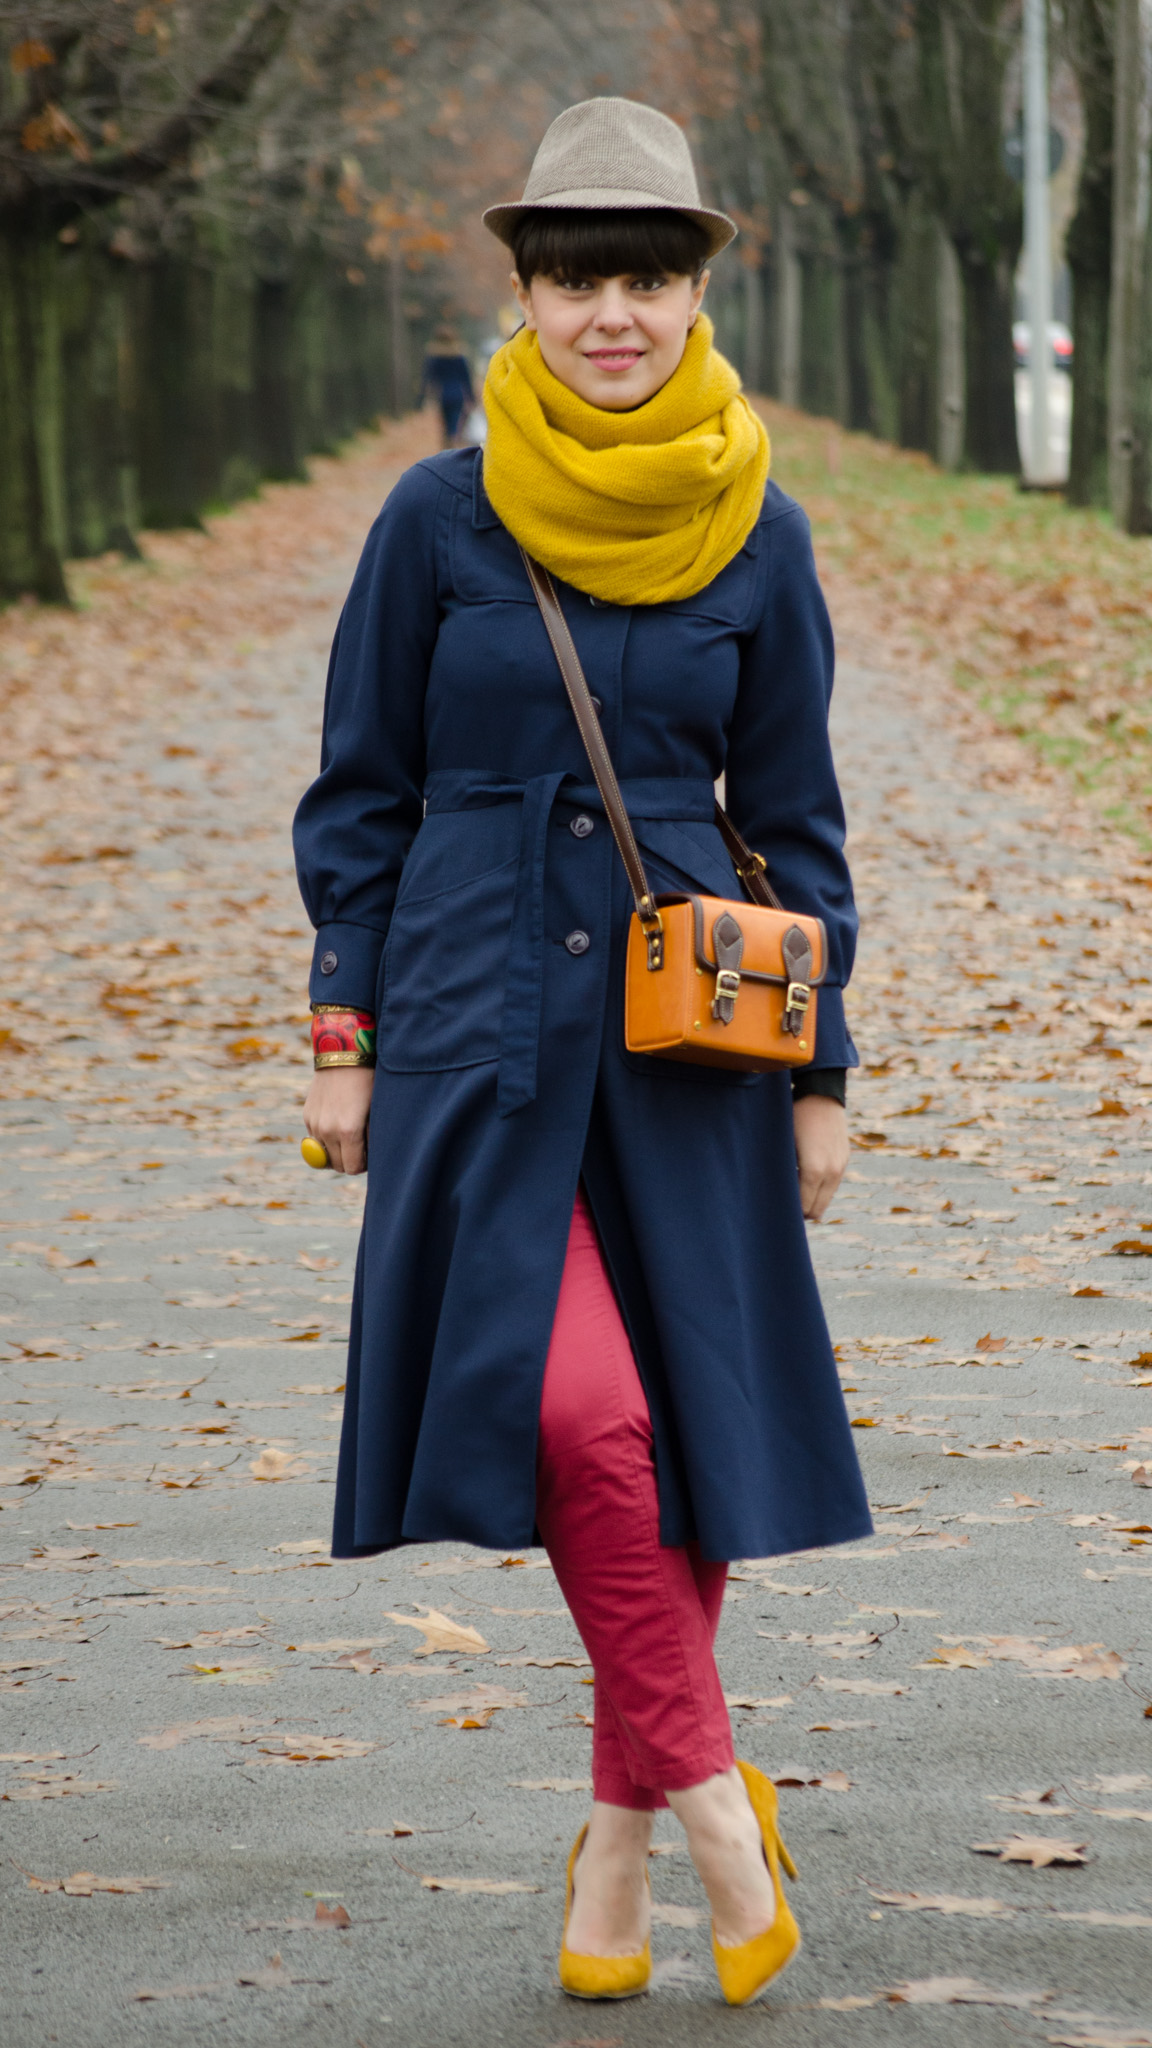 chic navy thrifted coat trench fedora hat h&m burgundy ankle cut pants mustard peoma shoes heels over sized scarf box bag satchel black turtleneck autumn fall bangs